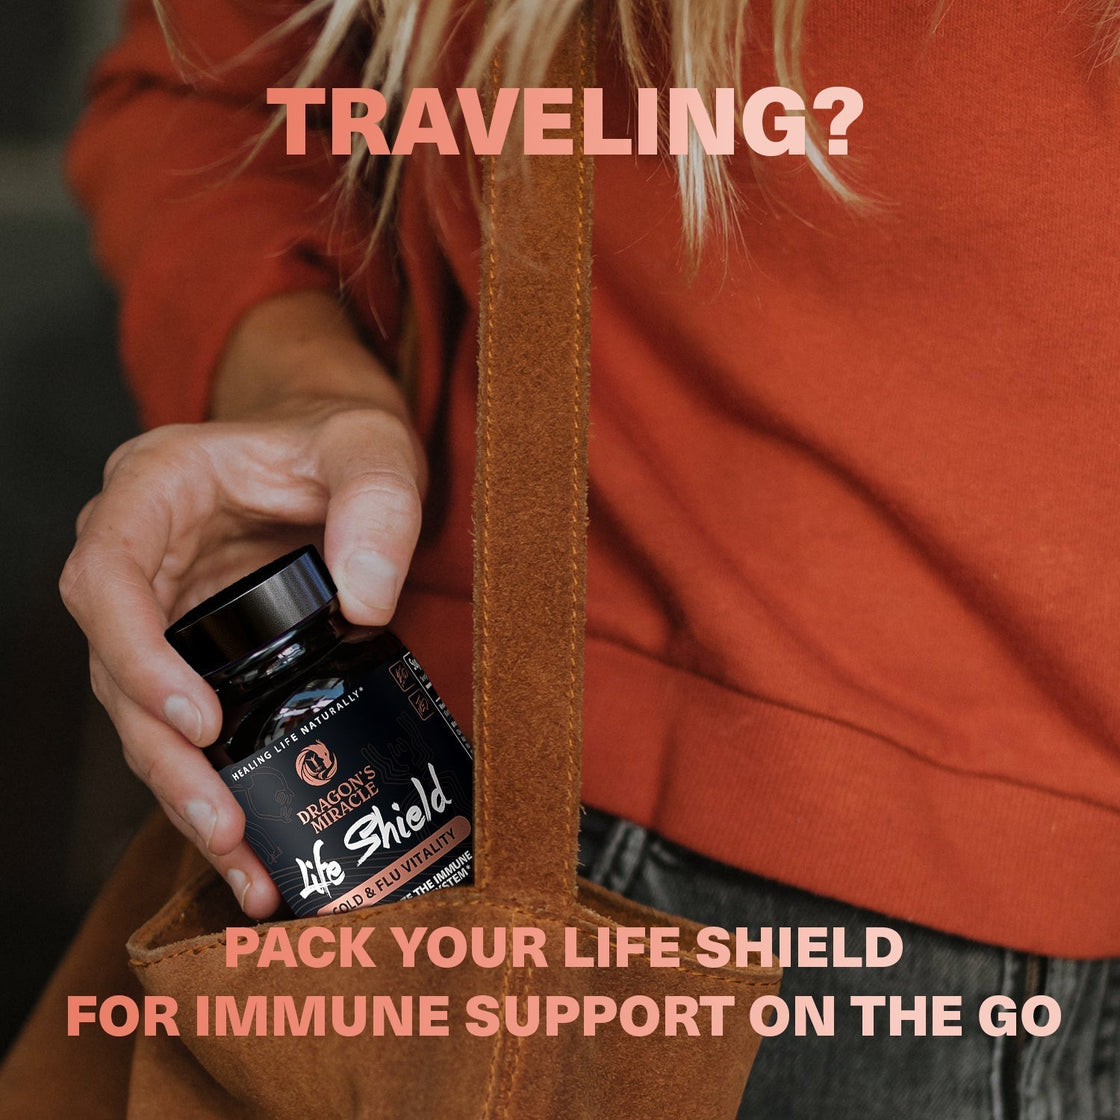 Life Shield Immune Support